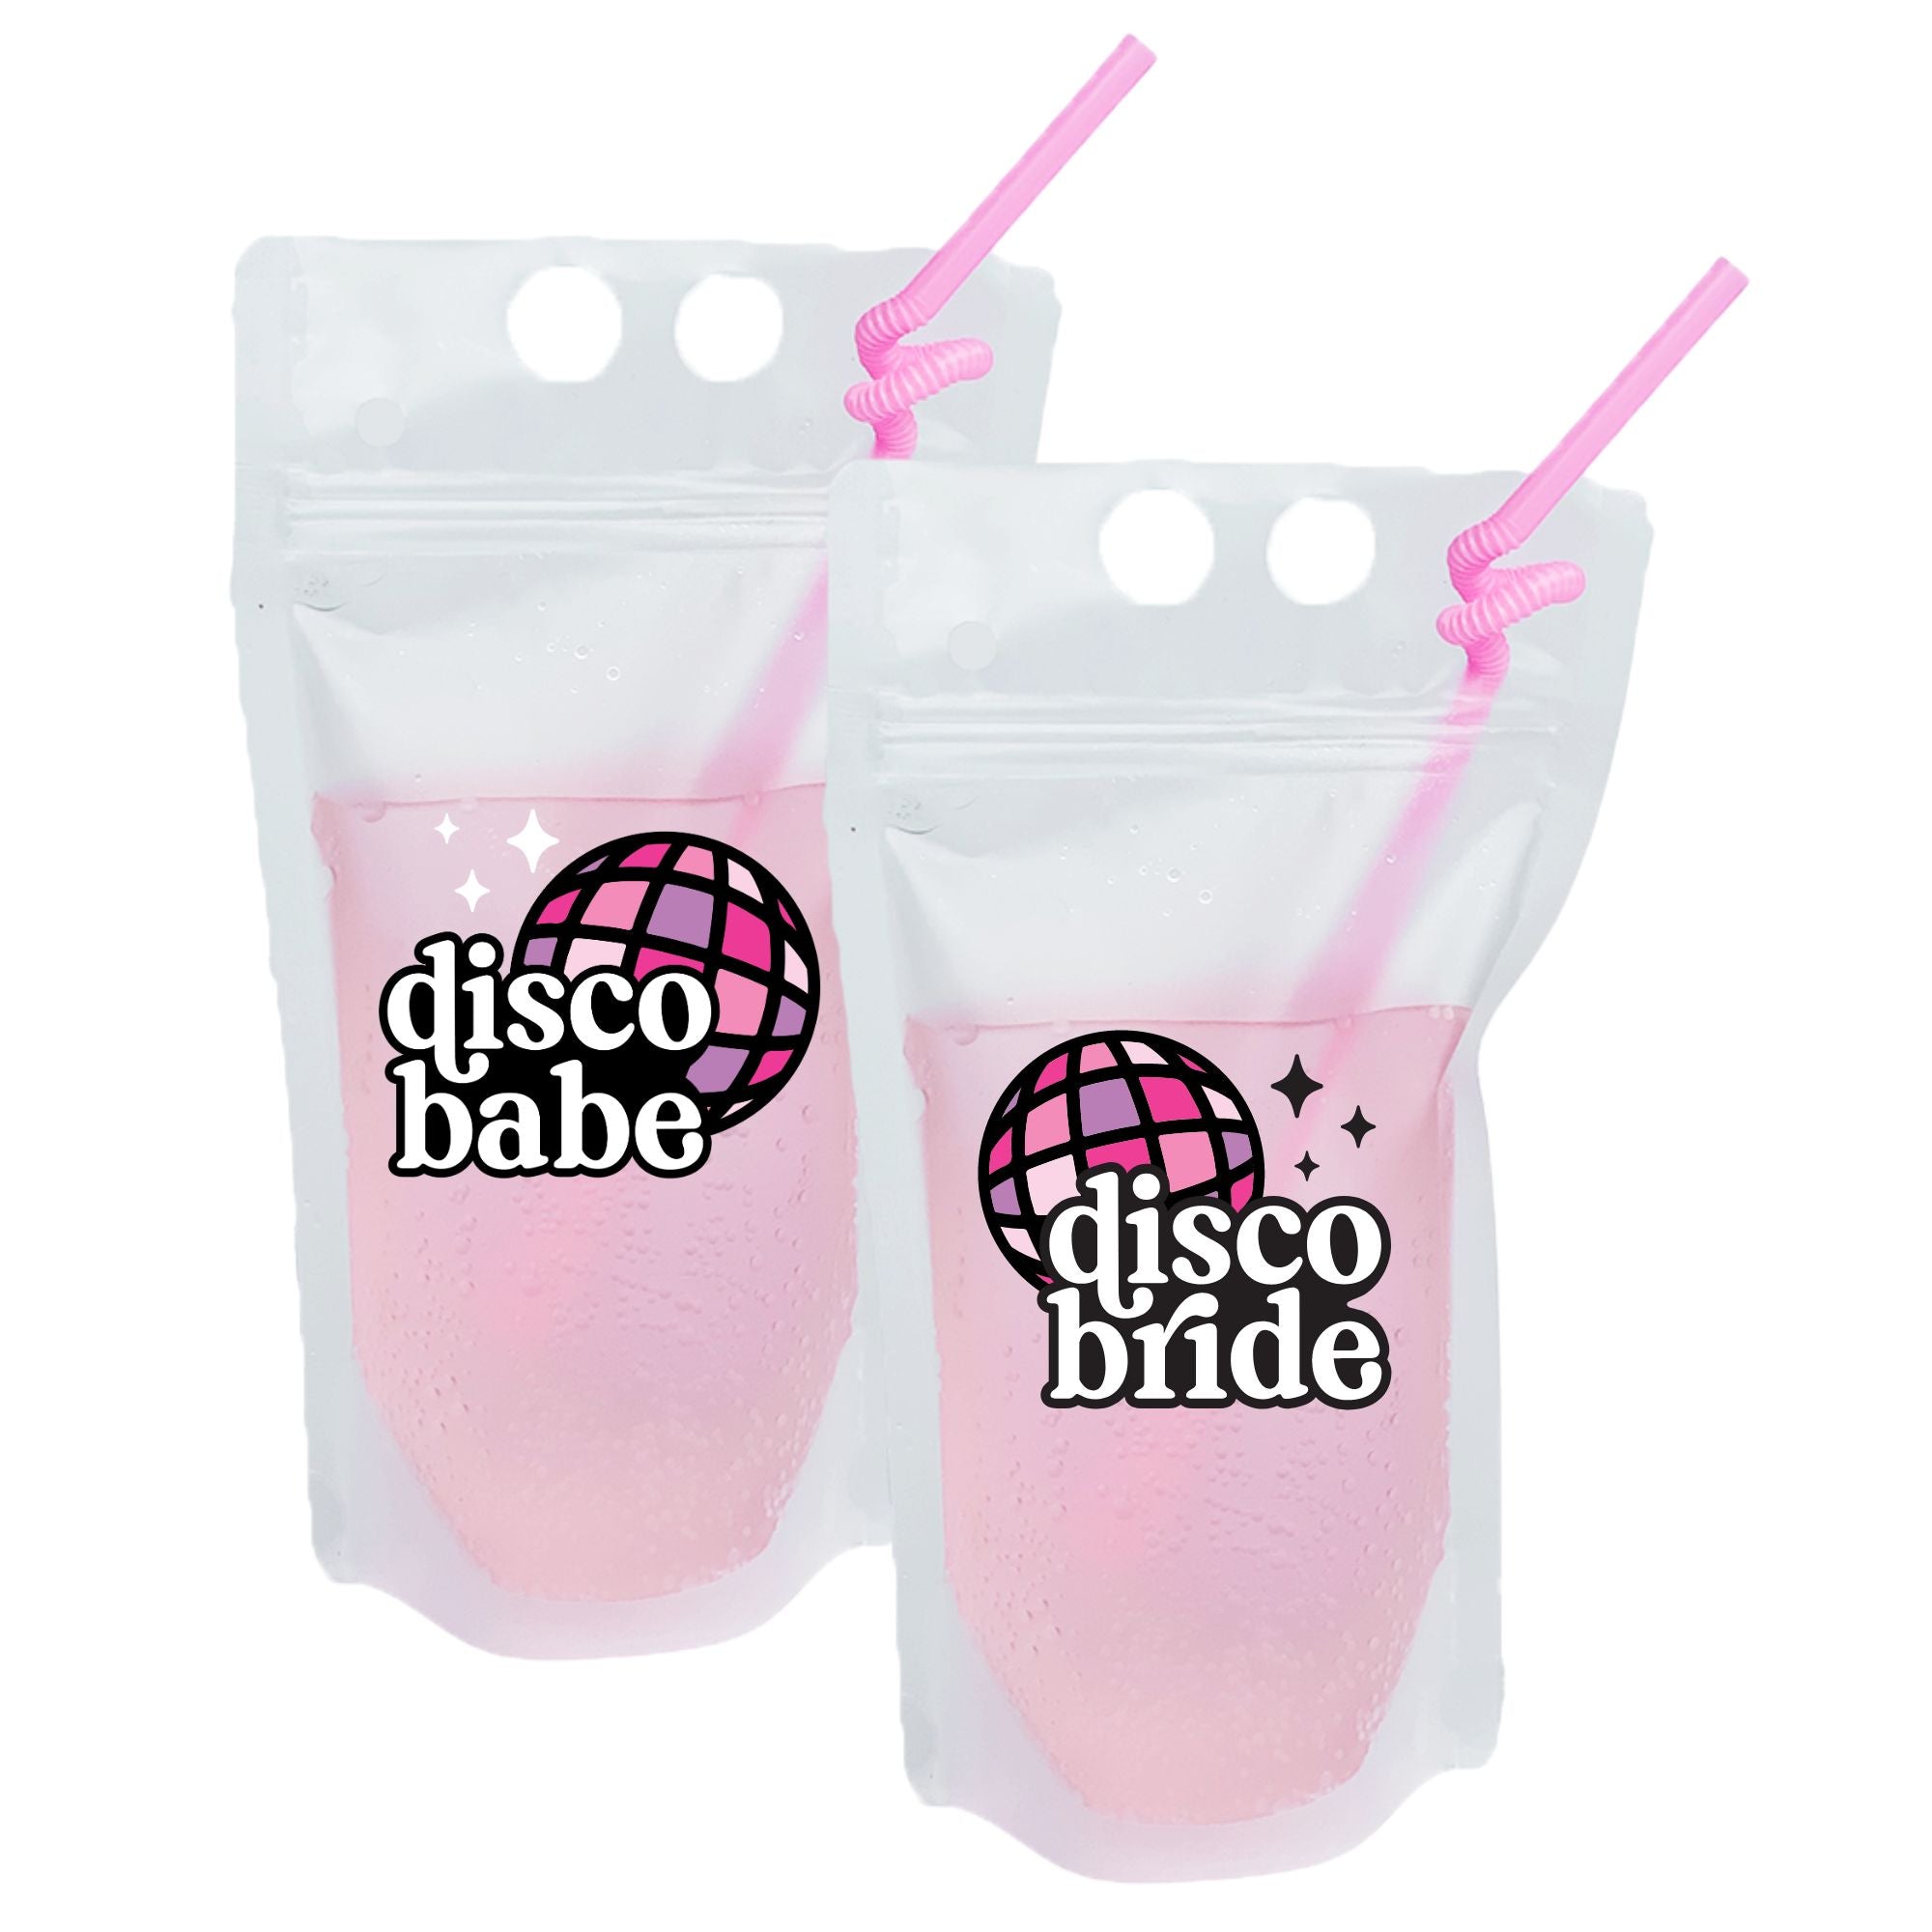 Disco Bride / Disco Babe Party Pouch with Disco Ball - Sprinkled With Pink #bachelorette #custom #gifts